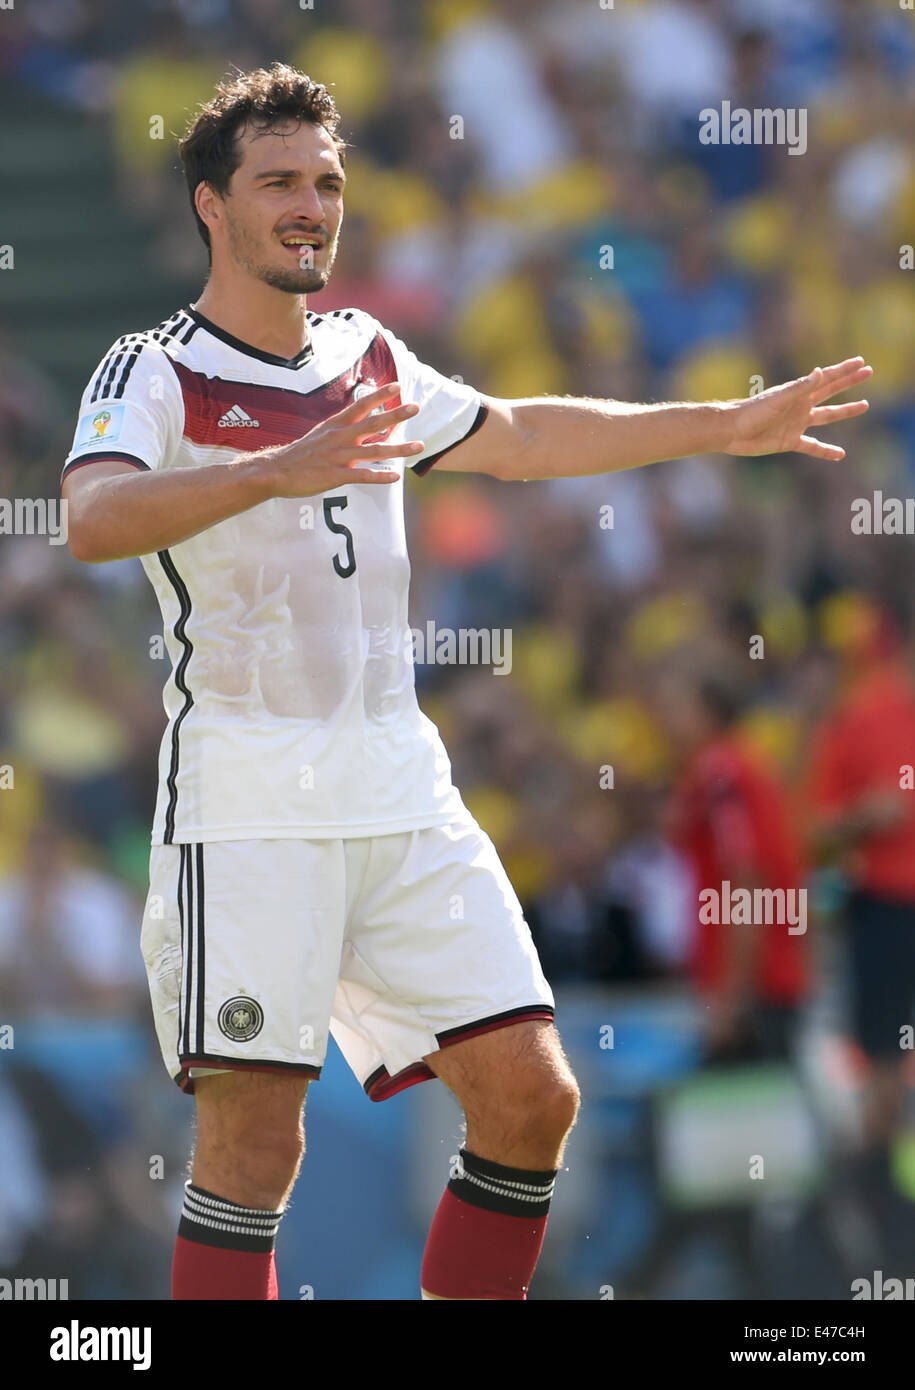 Rio de Janeiro, Brazil. 04th July, 2014. Mats Hummels of Germany gestures during the FIFA World Cup 2014 quarter final soccer match between France and Germany at Estadio do Maracana in Rio de Janeiro, Brazil, 04 July 2014. Photo: Andreas Gebert/dpa/Alamy Live News Stock Photo